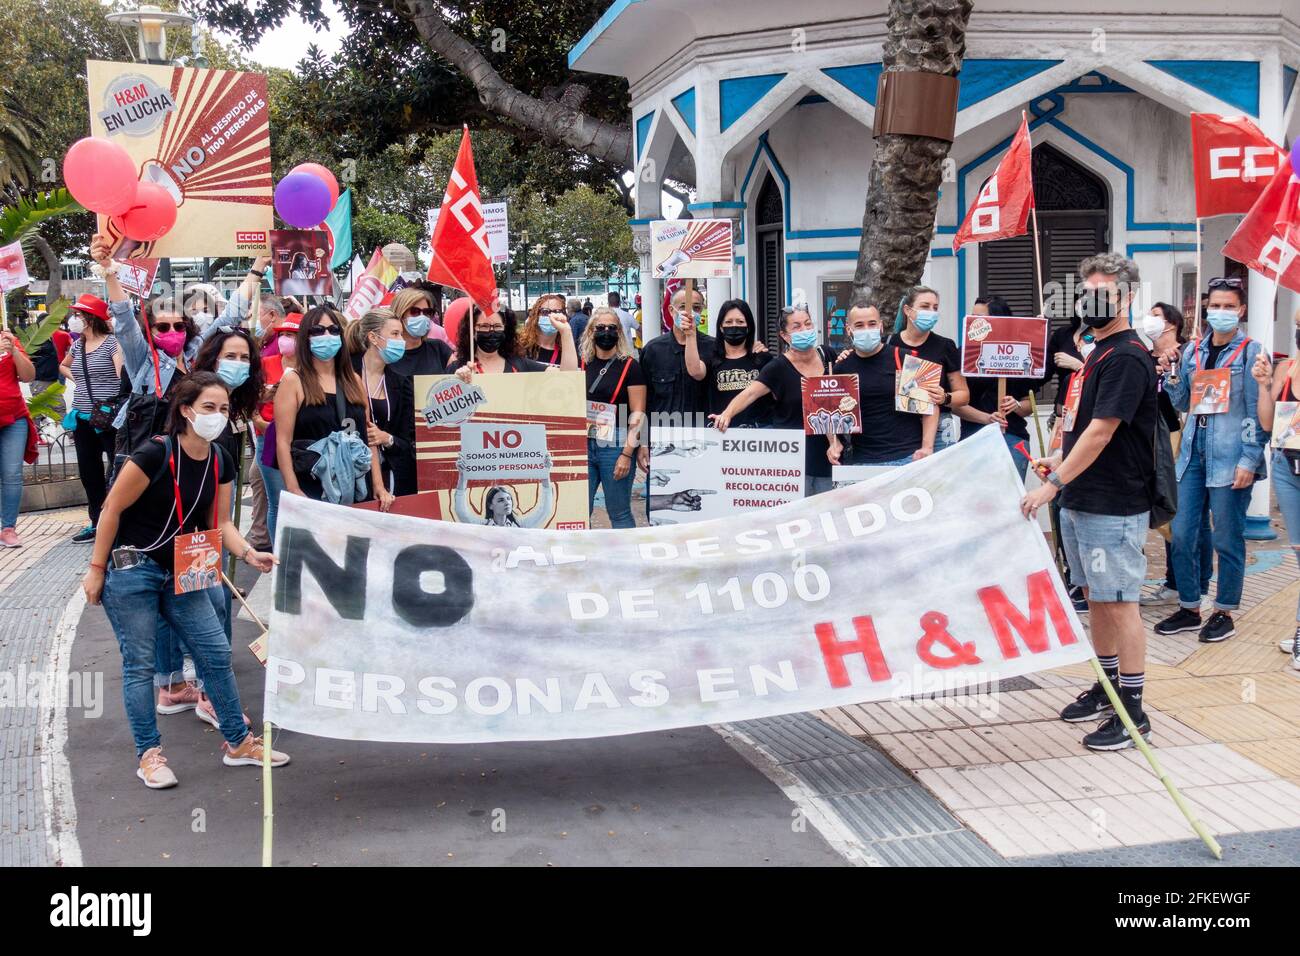 Las Palmas, Gran Canaria, Canary Islands, Spain. 1st May, 2021. Labour  day/International workers' day demonstration in Las Palmas the capital of Gran  Canaria. PICTURED: H&M store employees protest against the proposed closure